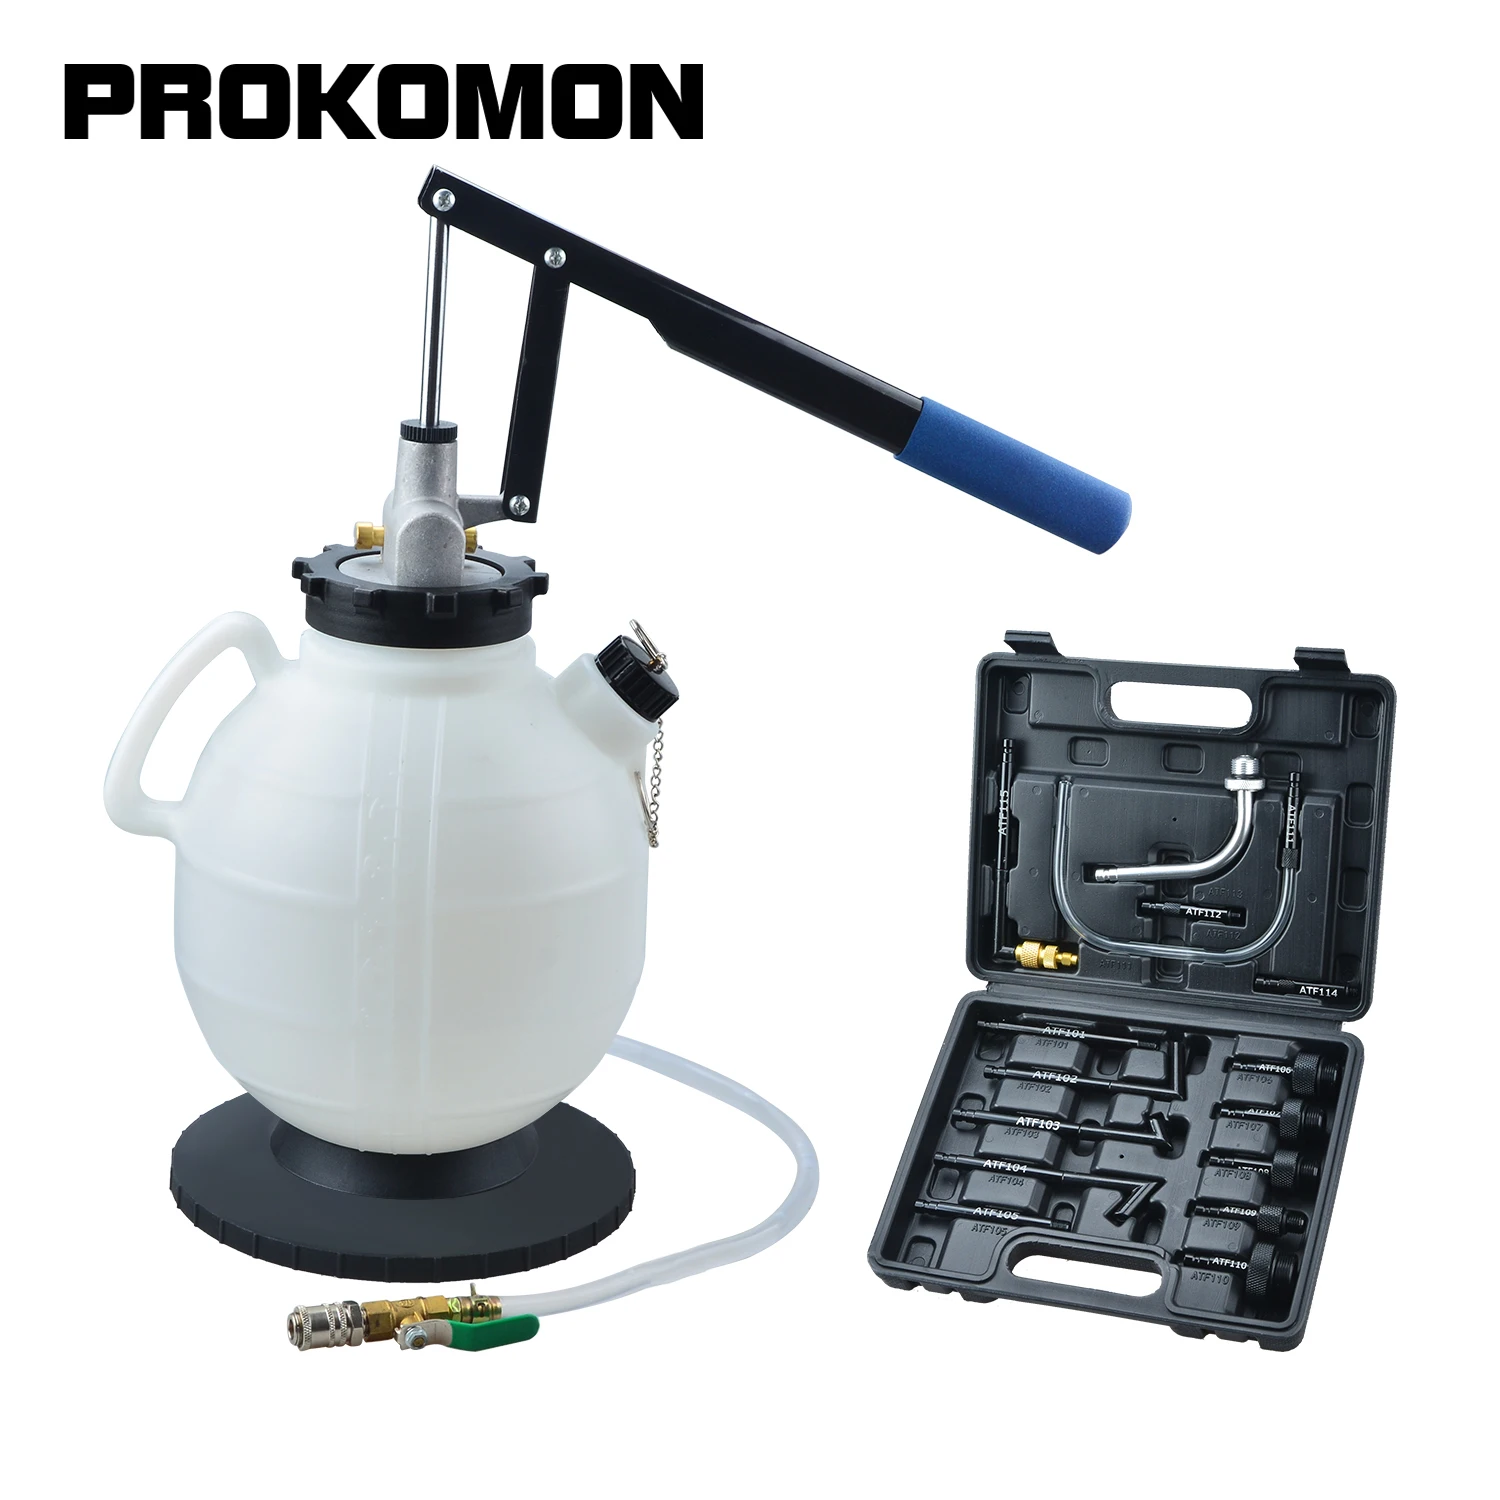 Prokomon 7.5L Hand Transmission Oil Filling Device Machine Gearbox Oil Filler Change Tool Toolkit